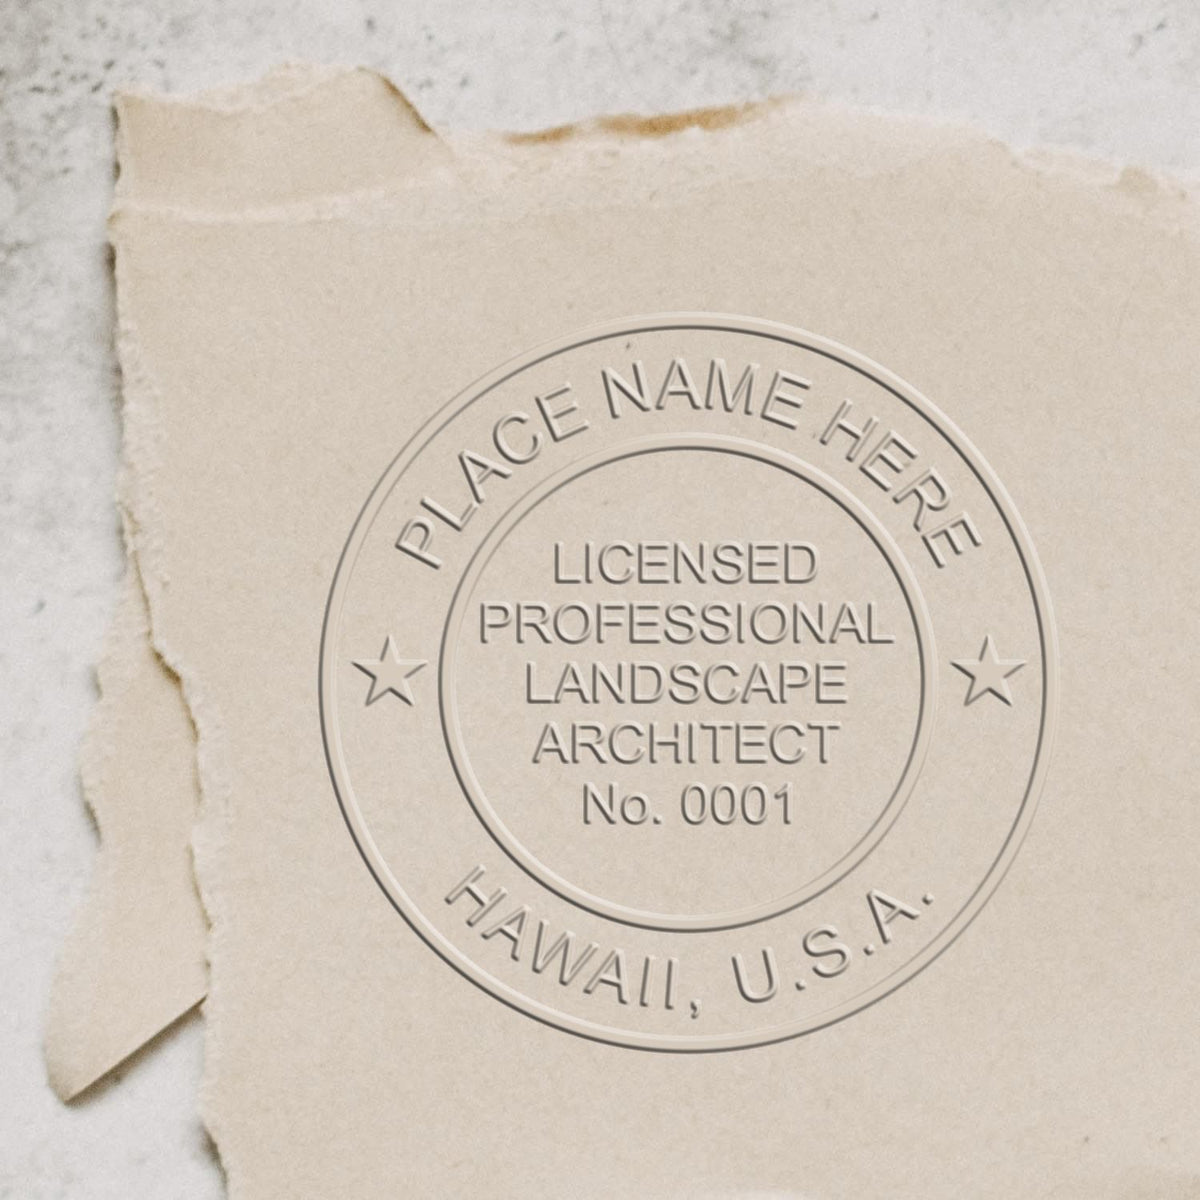 A photograph of the Hybrid Hawaii Landscape Architect Seal stamp impression reveals a vivid, professional image of the on paper.